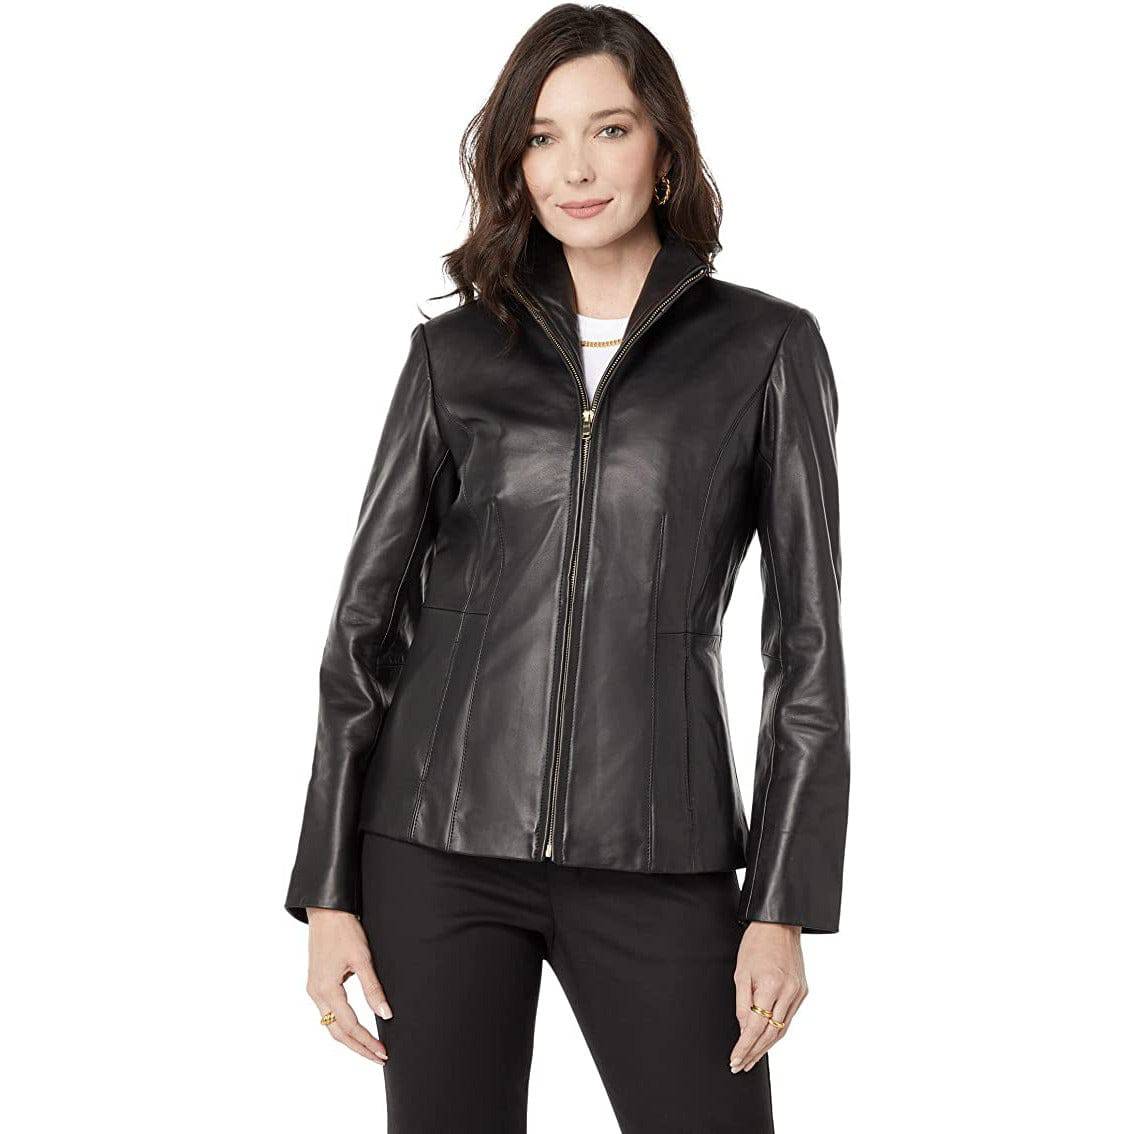 Cole Haan Women's Scuba Leather Jacket - Zooloo Leather